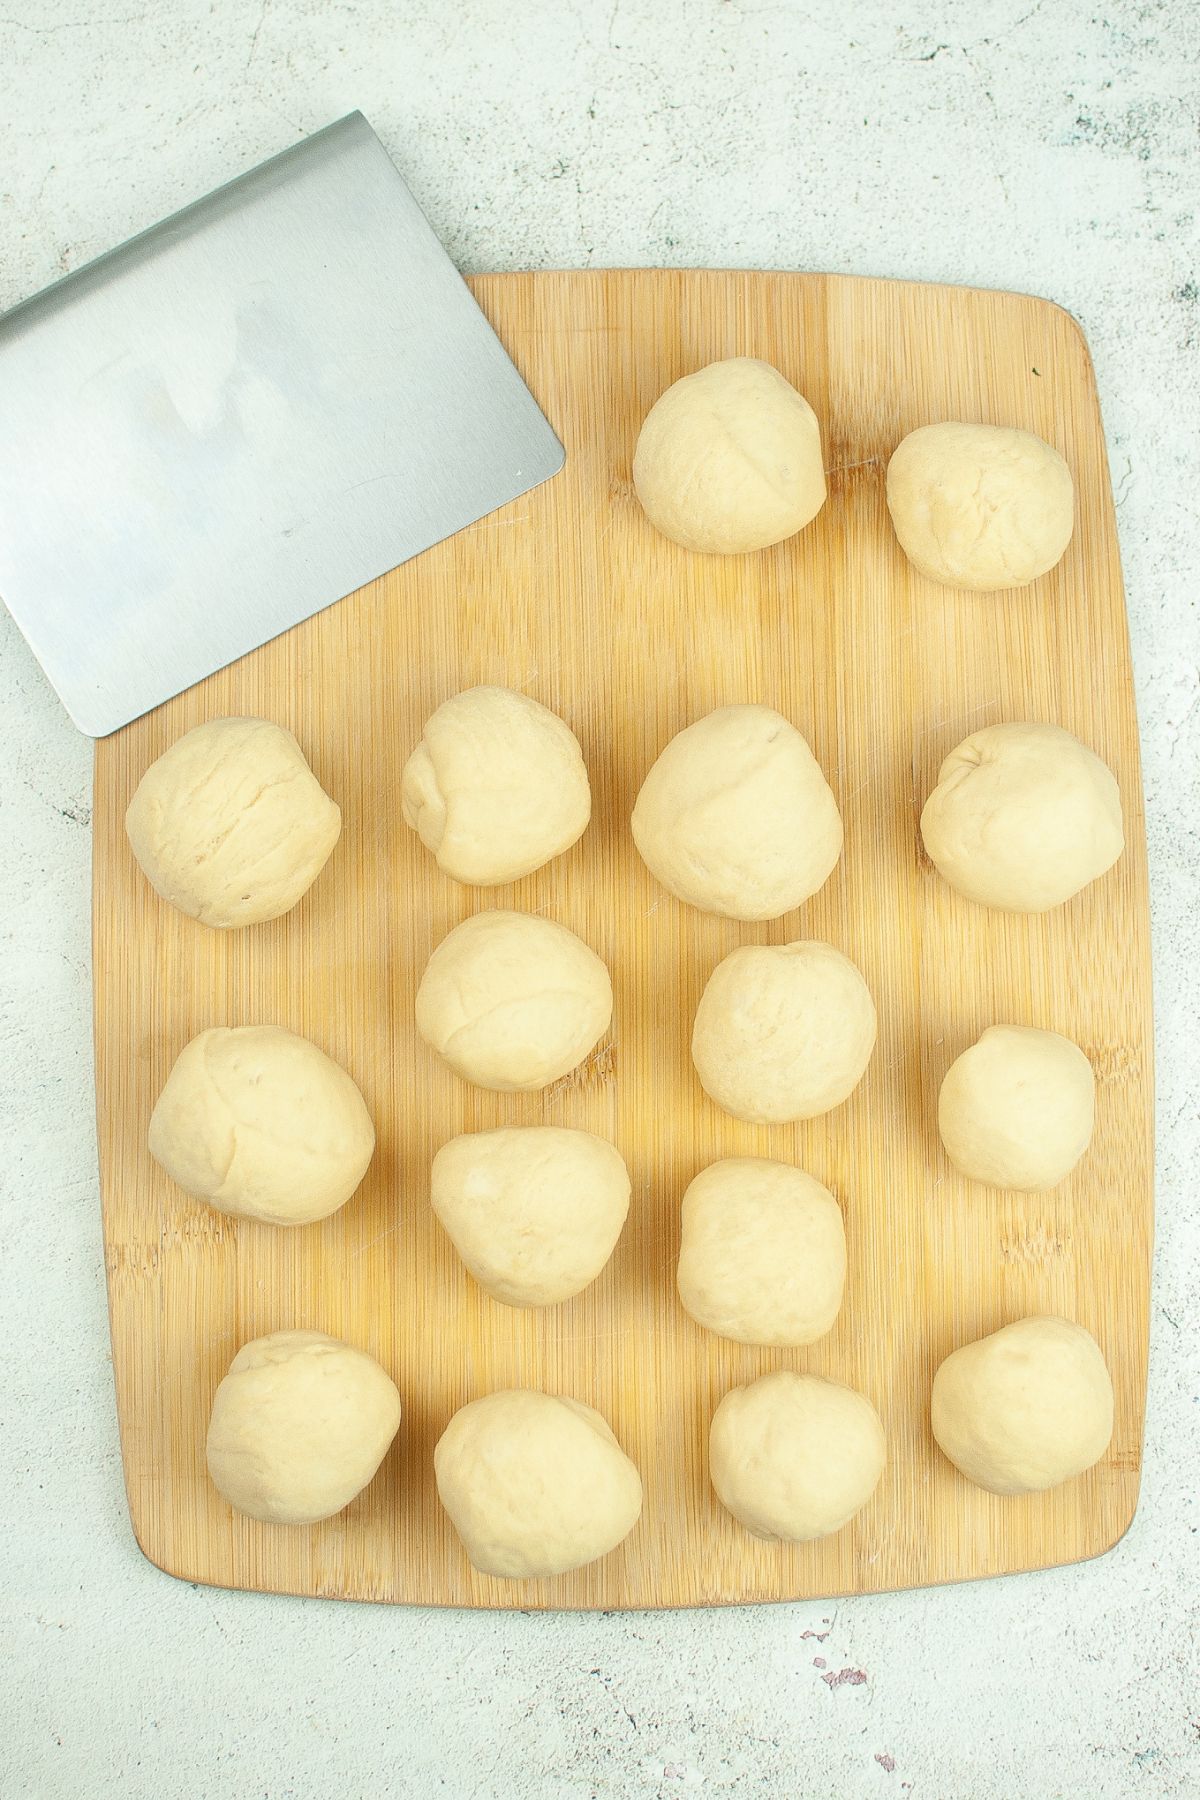 dough shaped into rolls on a wooden cutting board